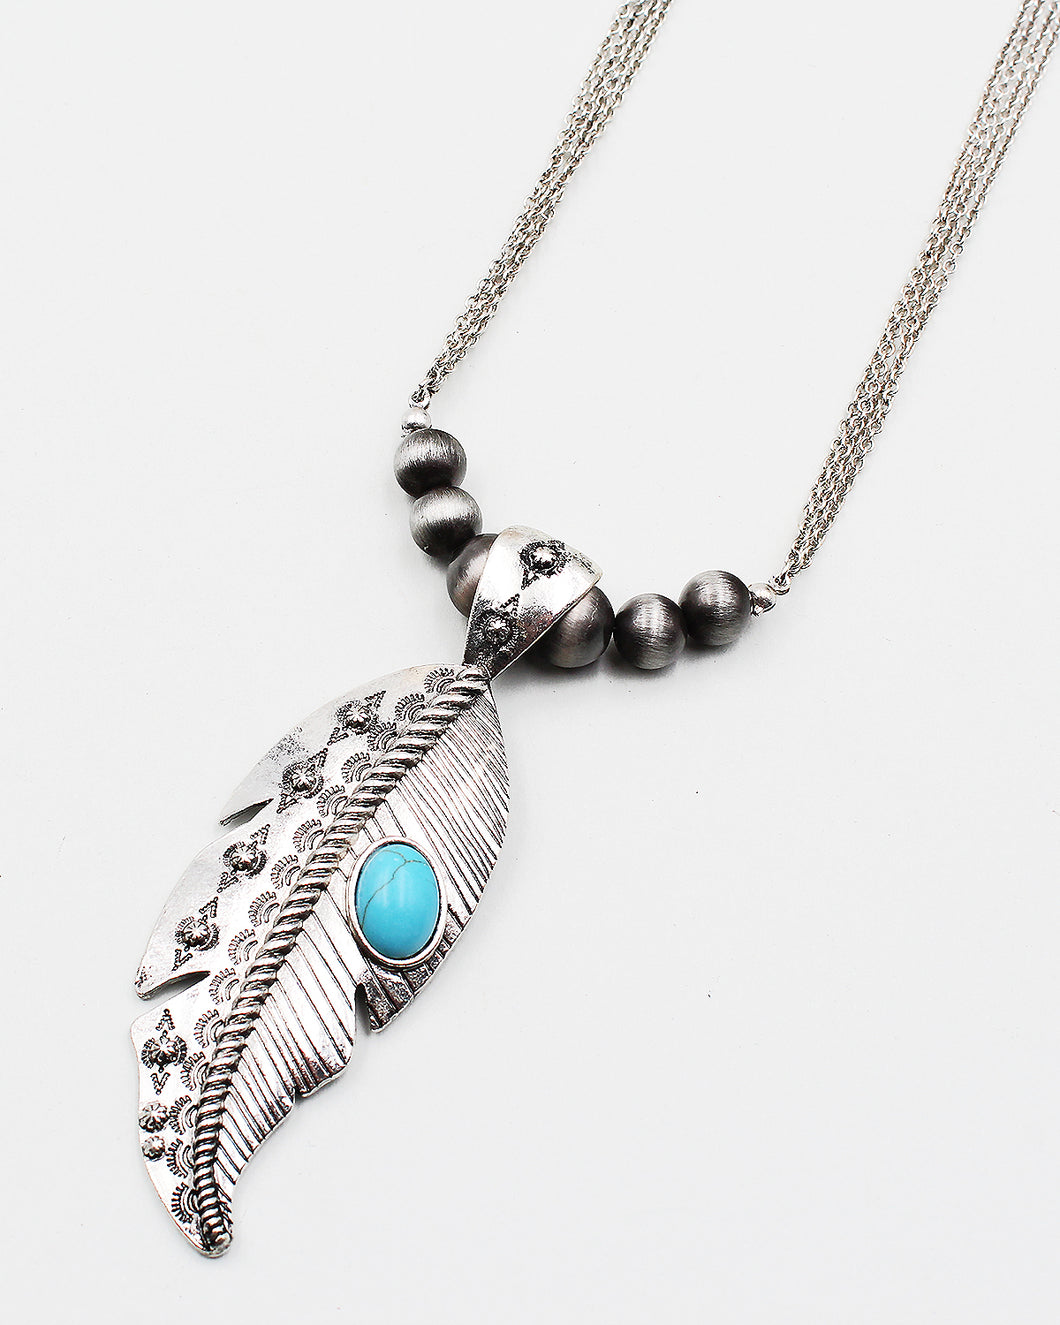 Metal Leaf Pendant Necklace Set with Turquoise Accent